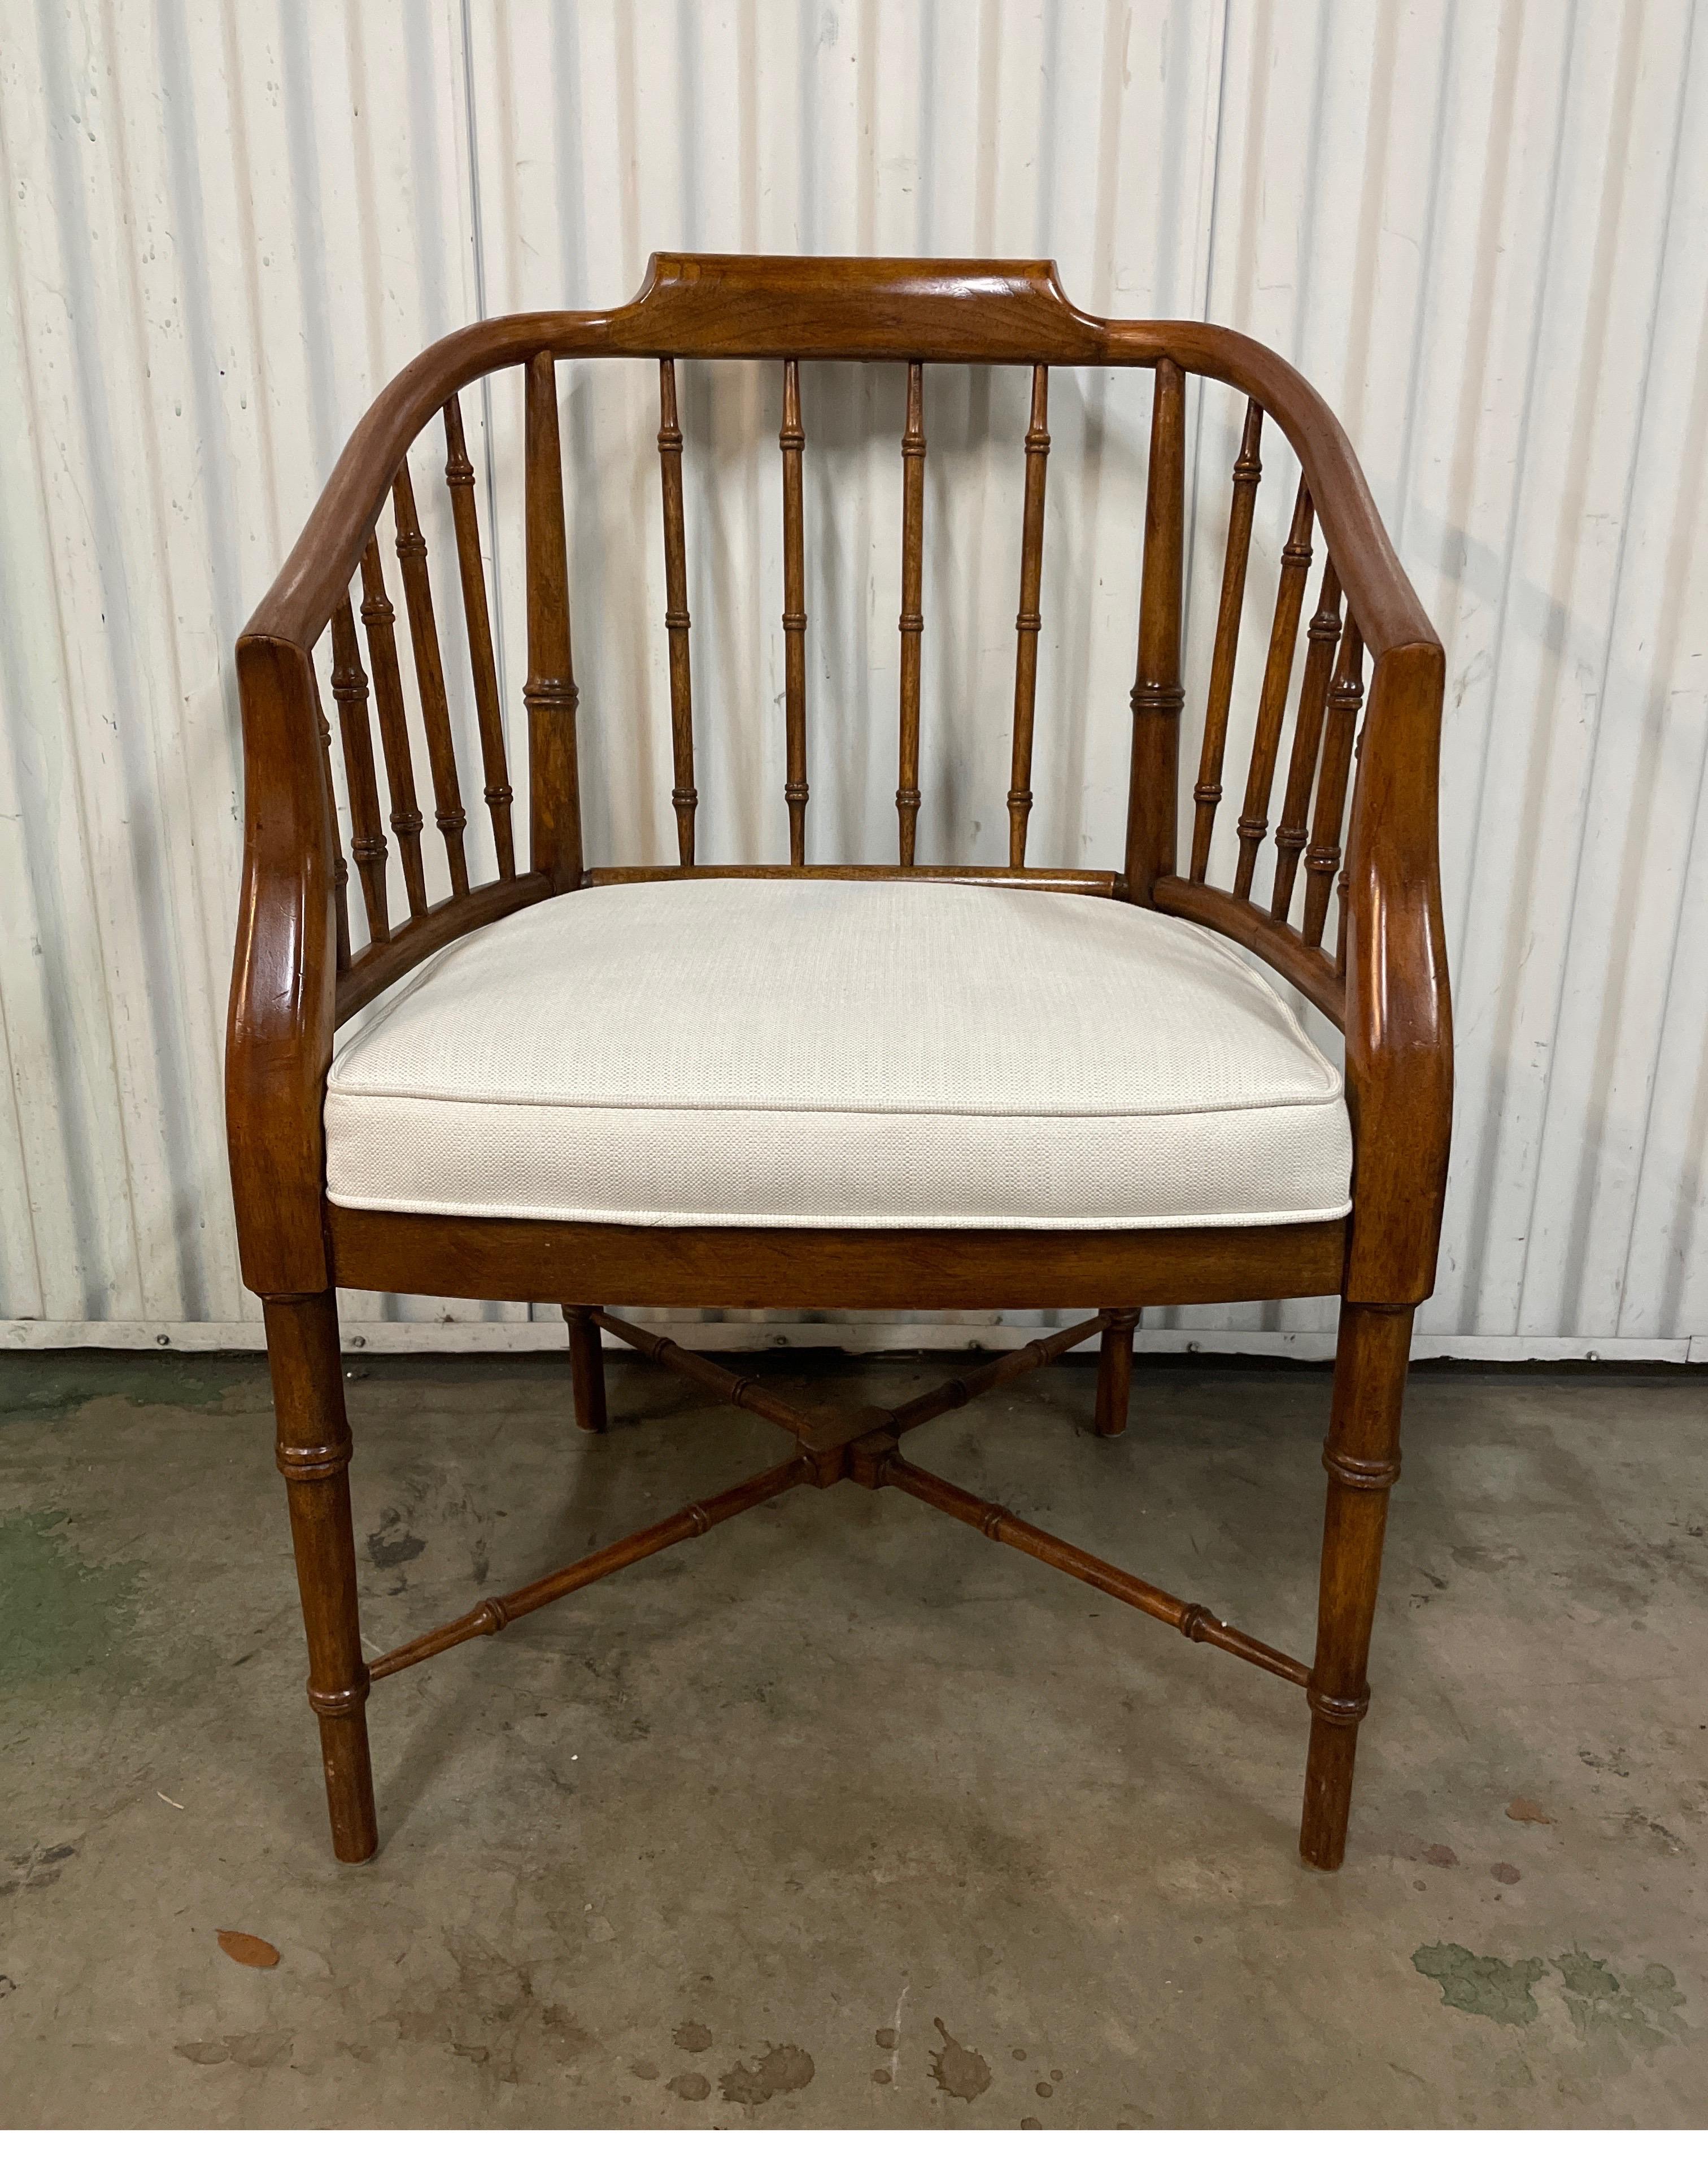 Vintage faux bamboo armchair with newly upholstered seat cushion.